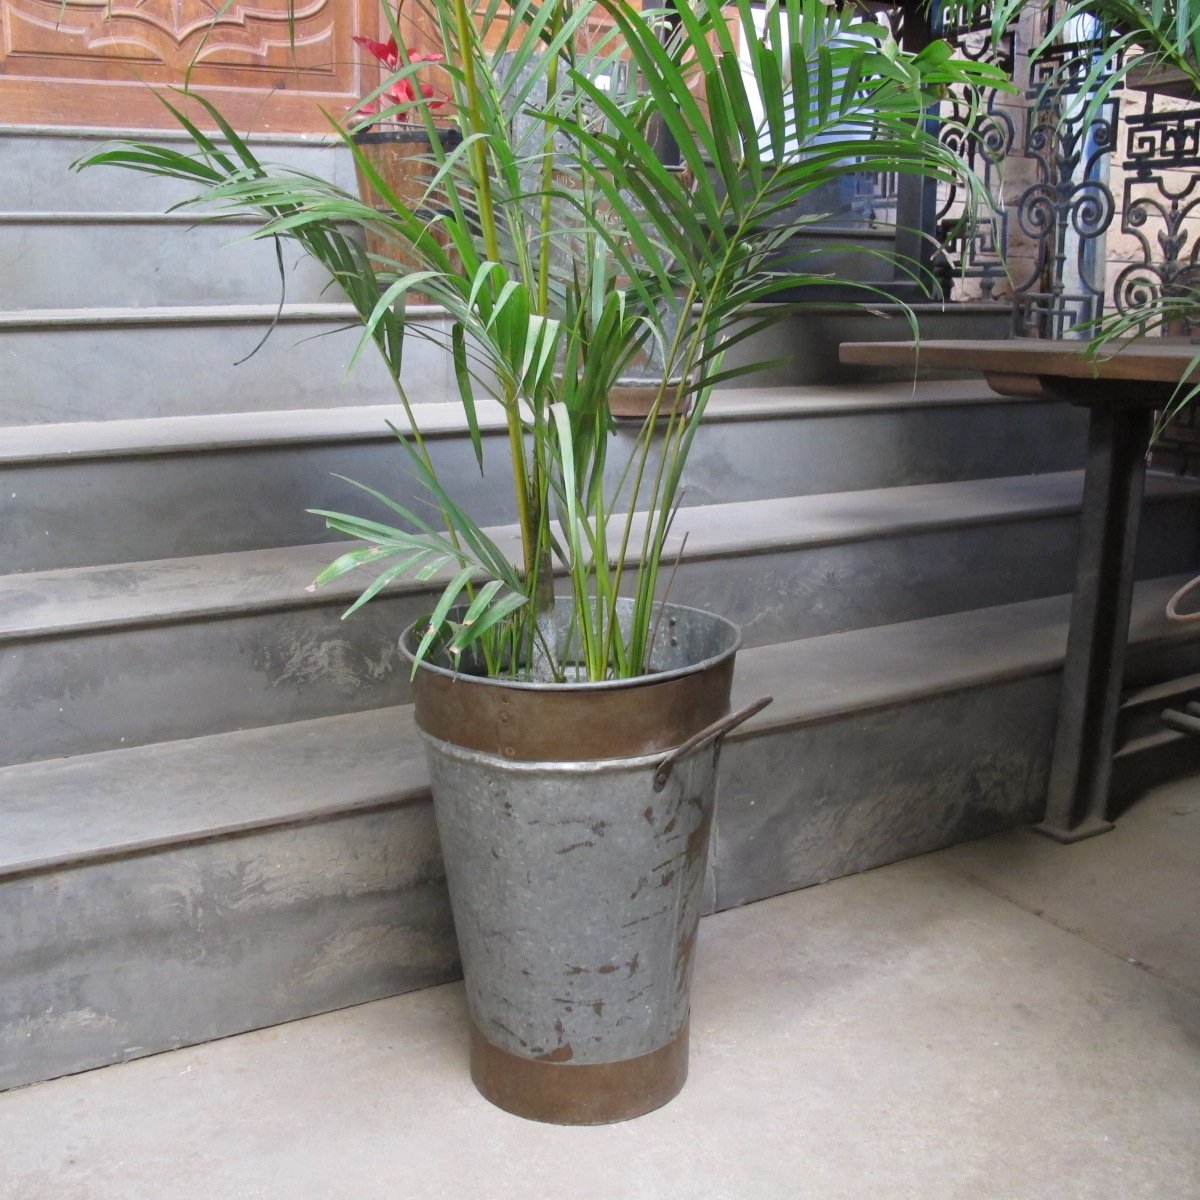 Galvanised Iron Tapered Bucket - From Rajasthan - 35 x 35 x 50 (wxdxh cms) - A5964